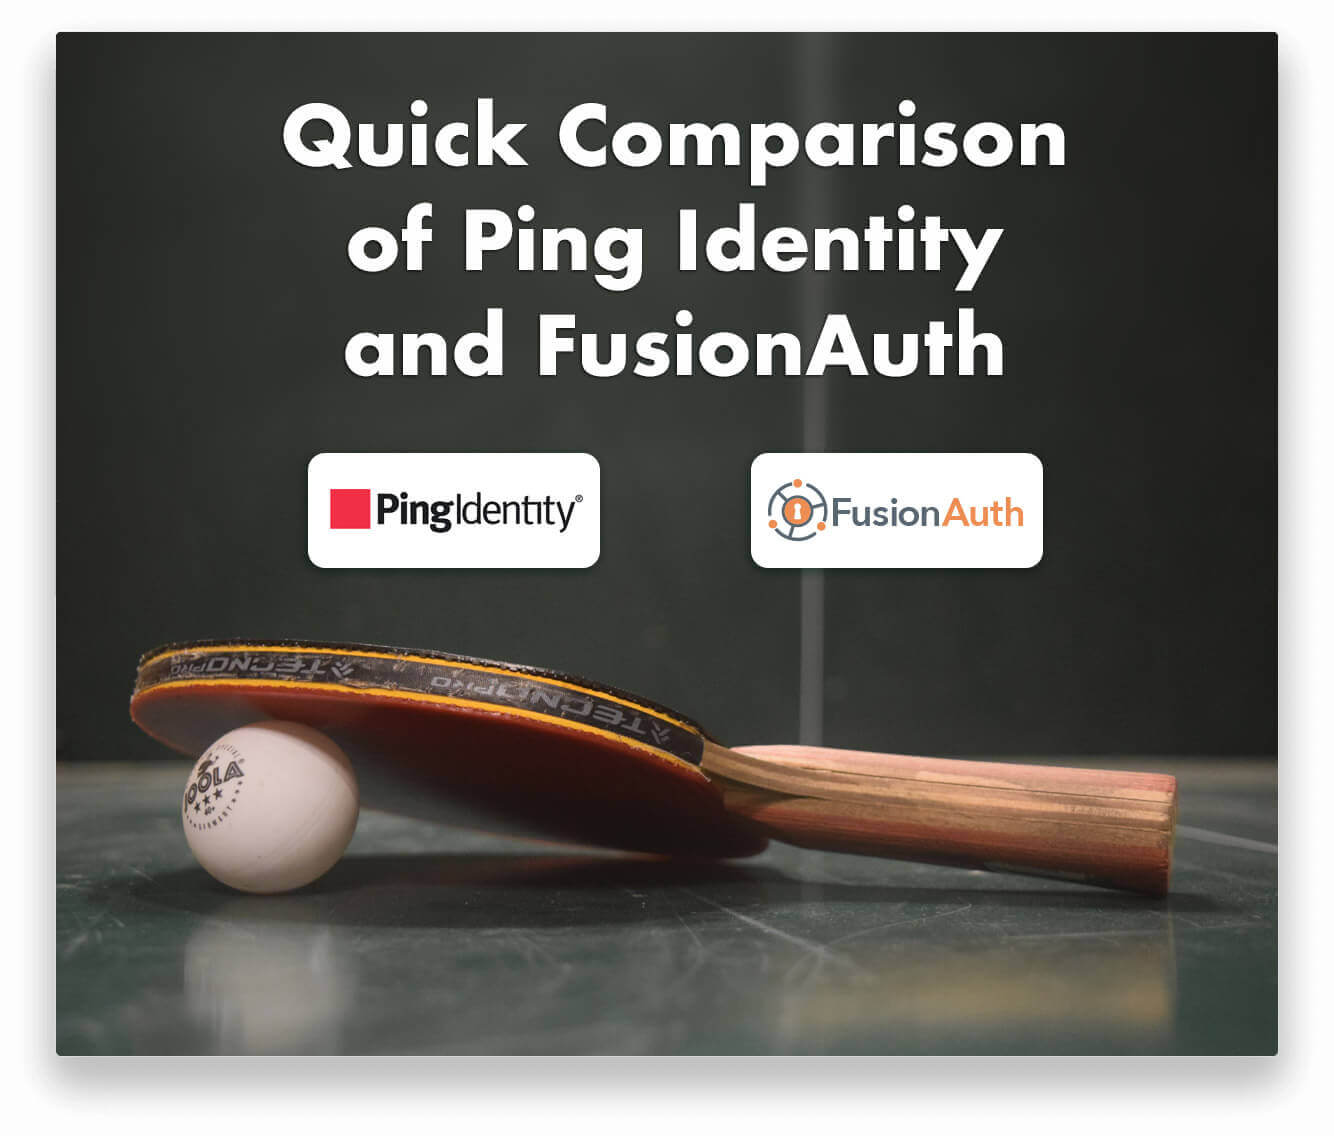 A Quick Comparison Of Ping Identity And FusionAuth